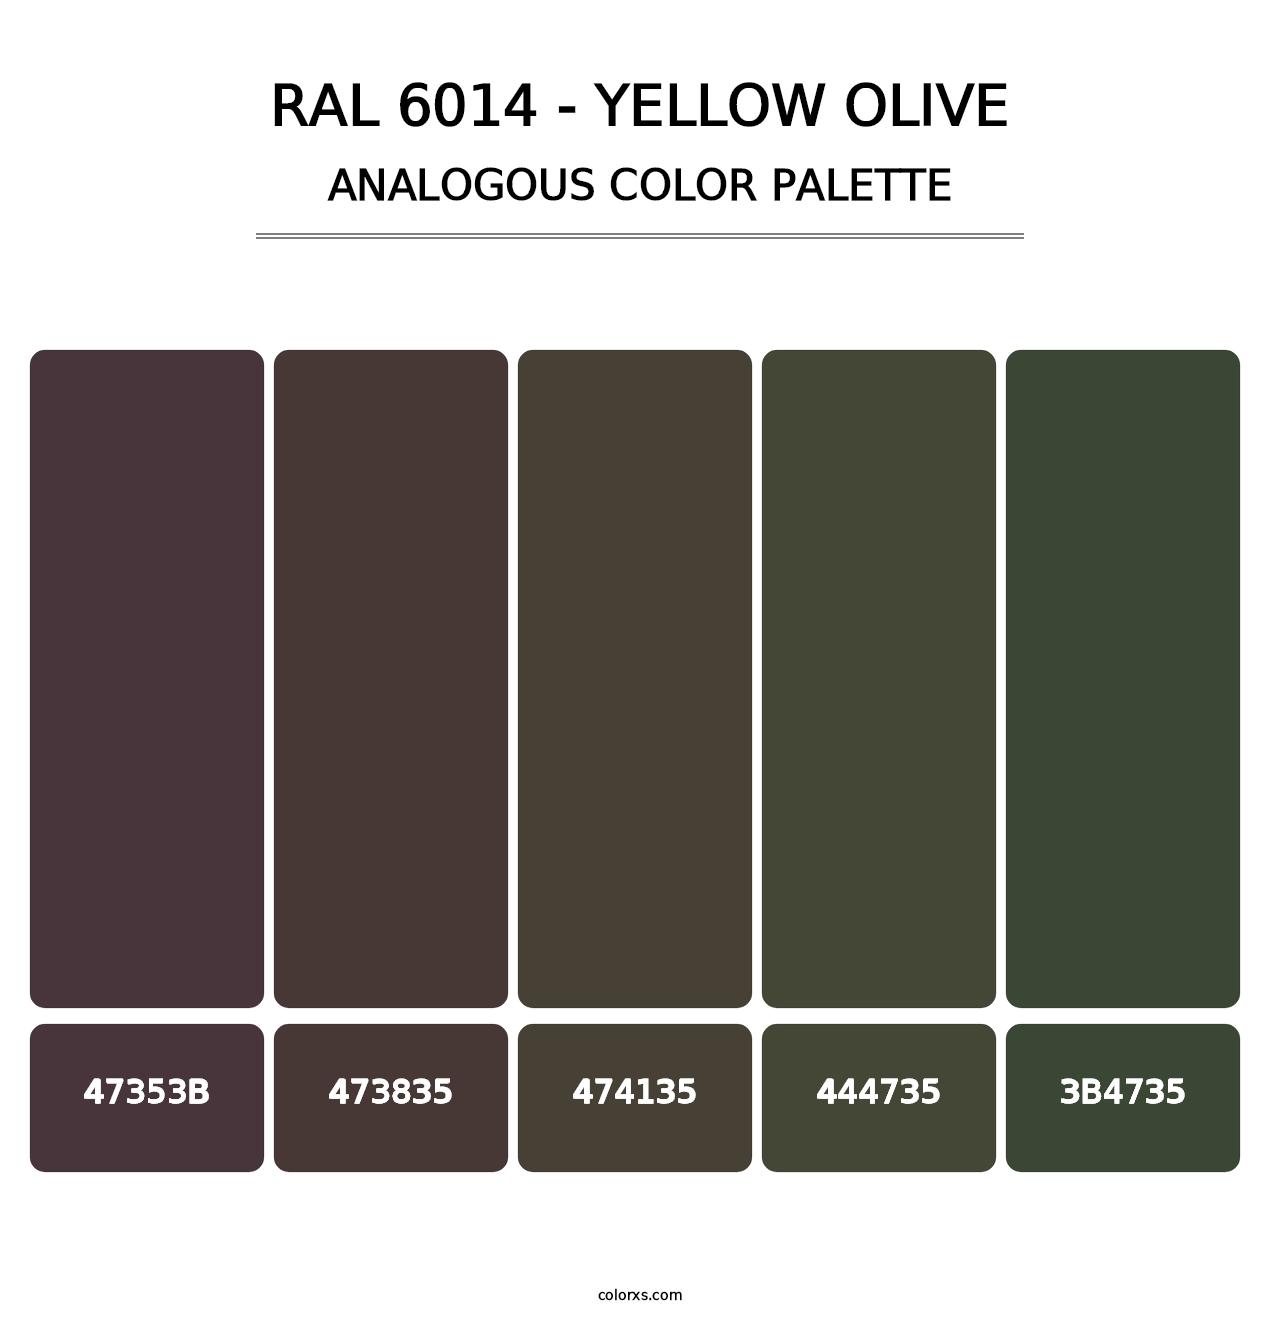 RAL 6014 - Yellow Olive - Analogous Color Palette